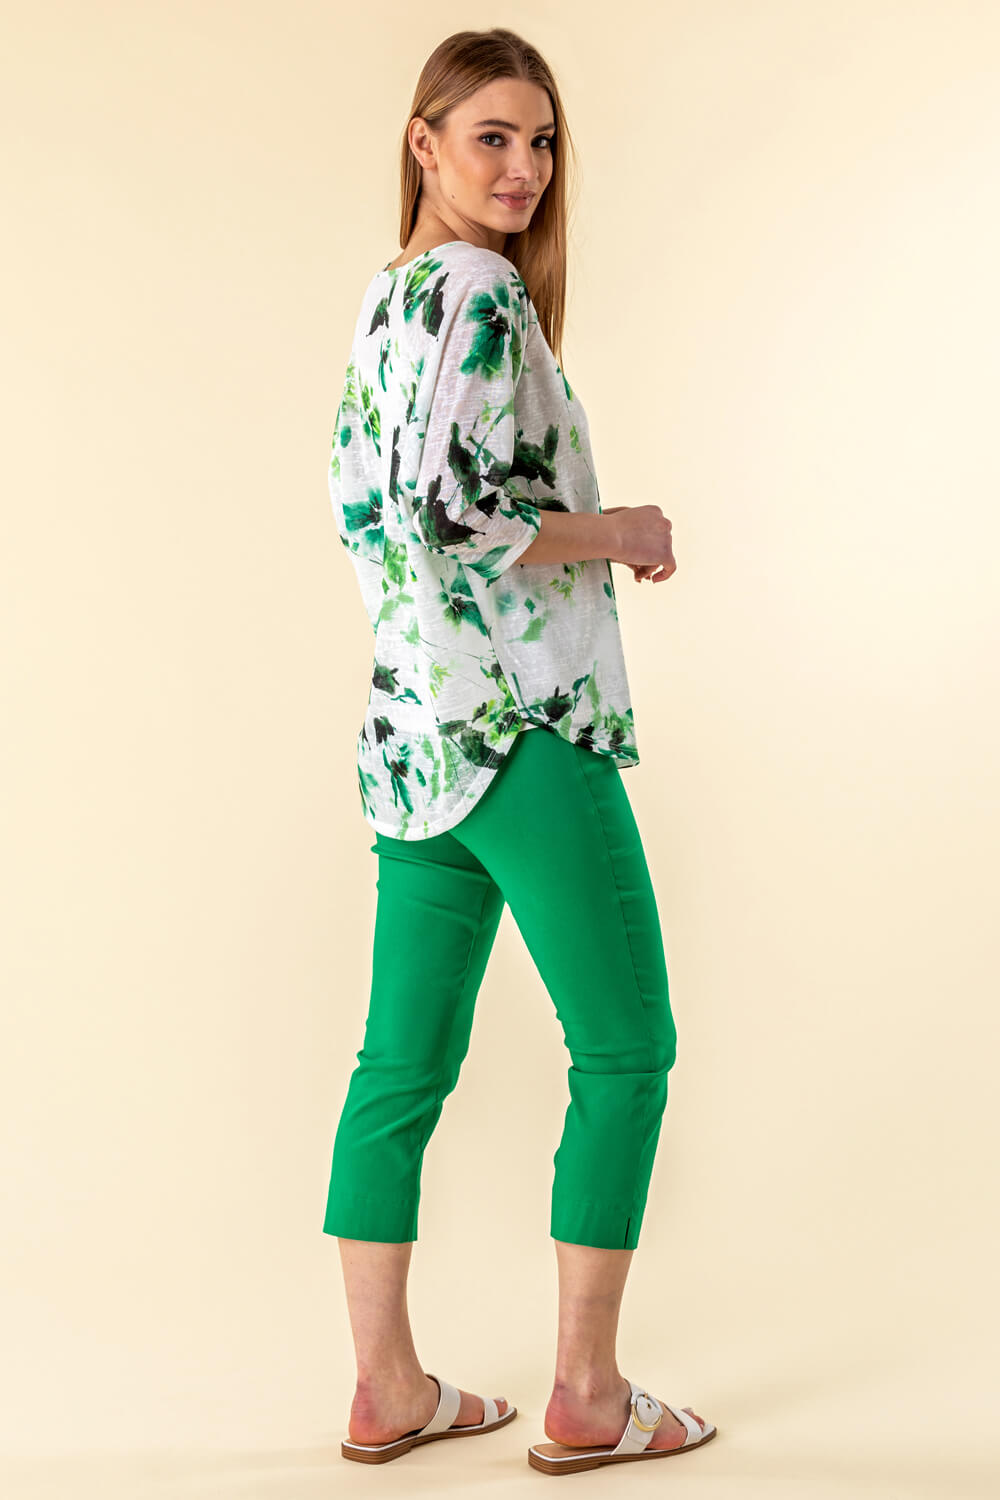 Green Floral Print Jersey Top, Image 3 of 4